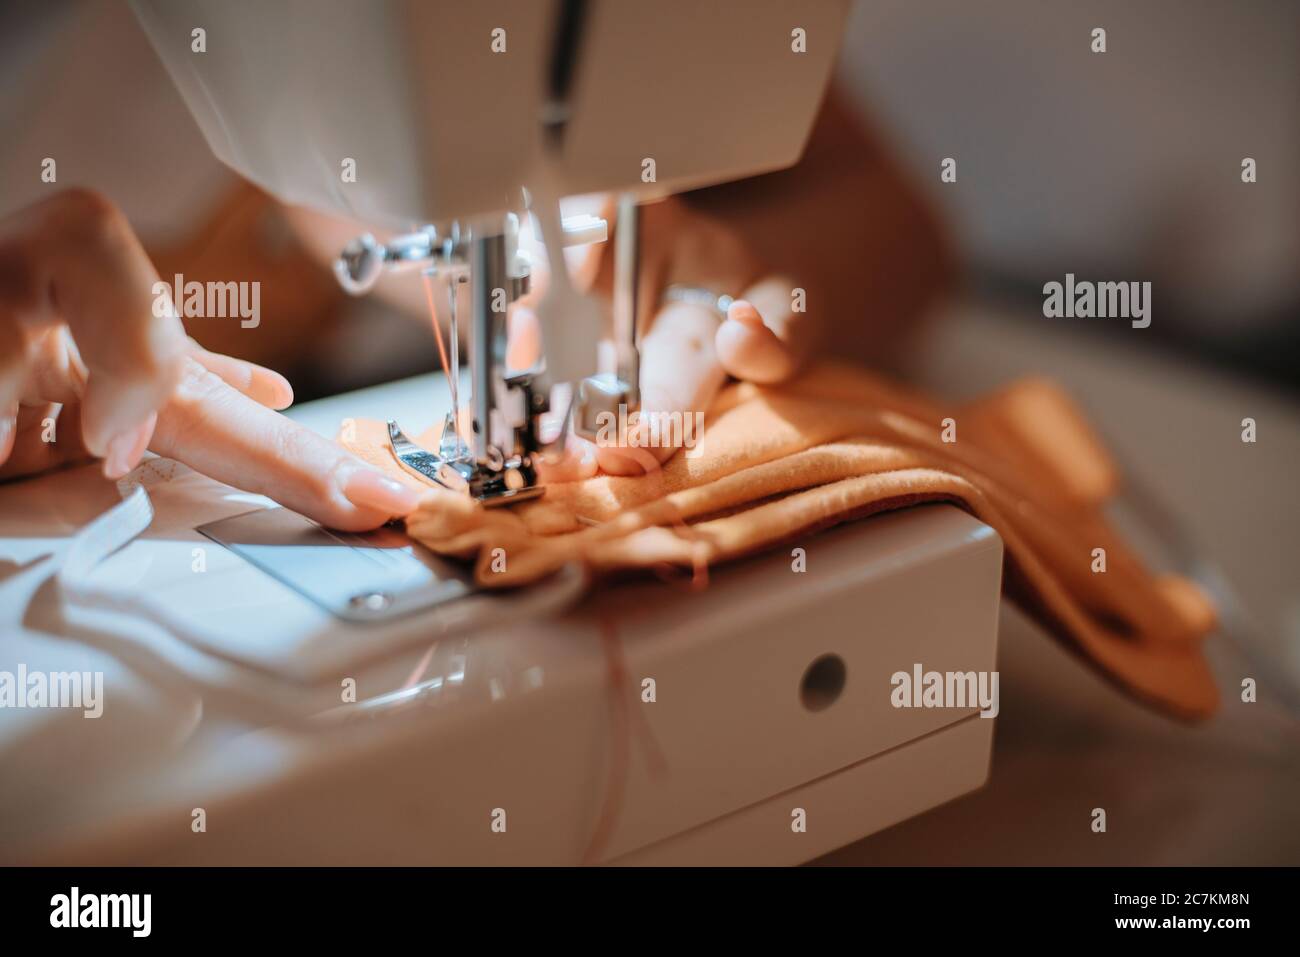 Woman sewing face mask for corona covid pandemic with sewing machine, Stock Photo